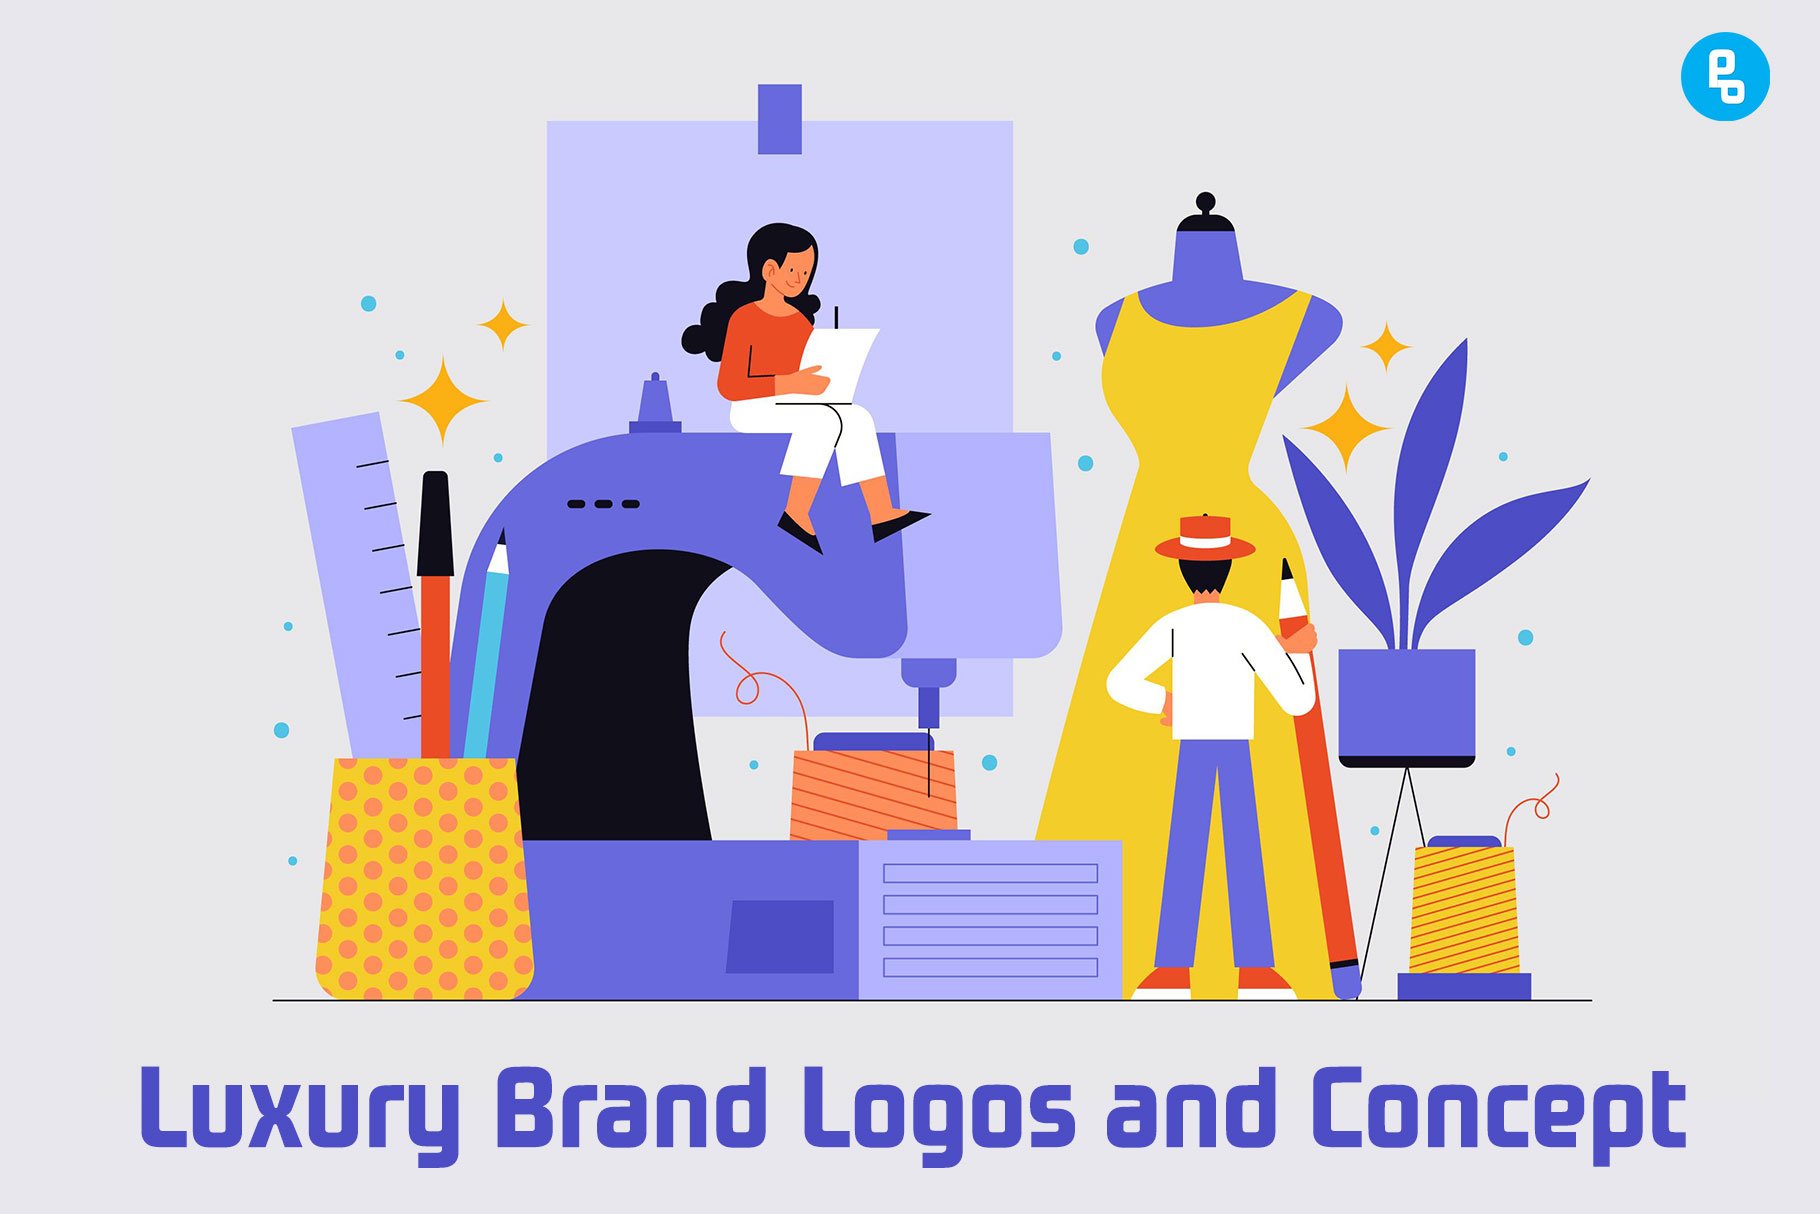 In this article, we will take a look at 15 of the most iconic logos in the world of fashion. These are some of the most well-known luxury brands in the world, and they have all used these logos as symbols to represent their products.